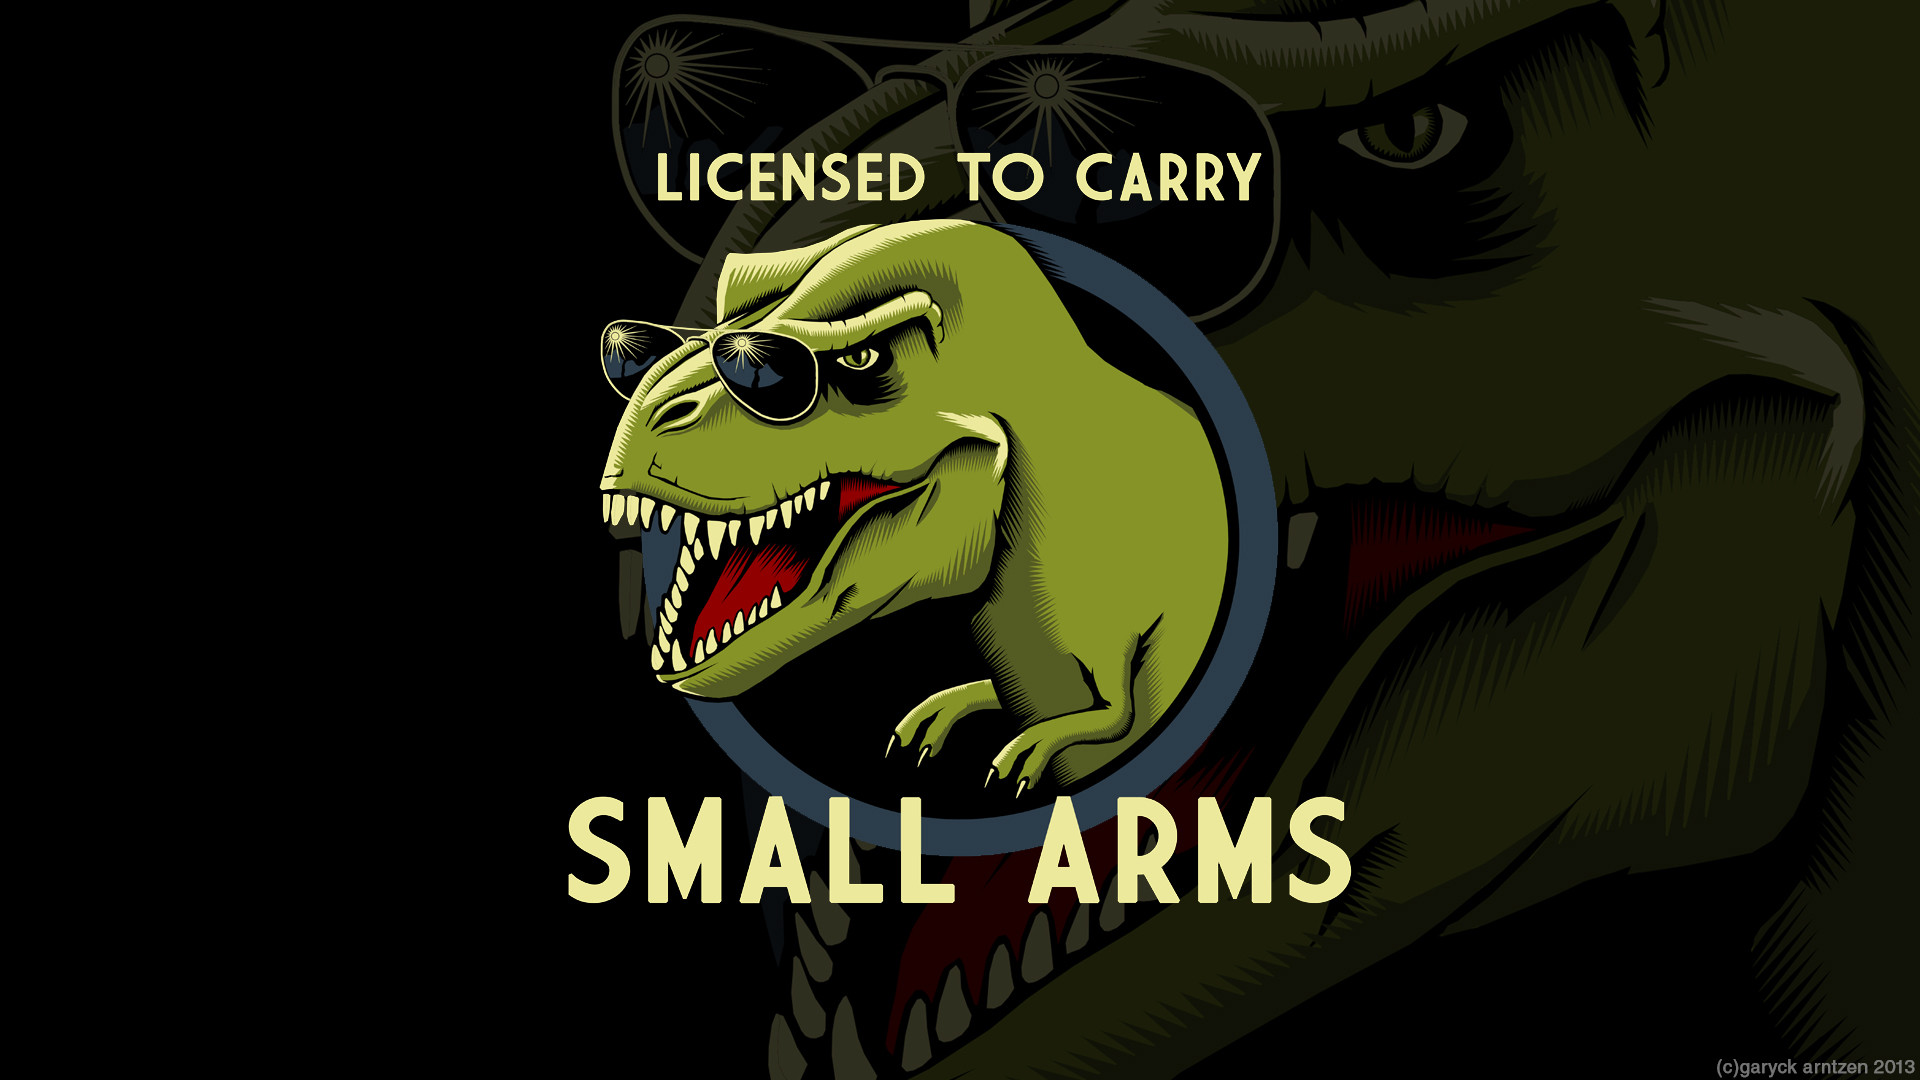 License To Carry Small Arms - HD Wallpaper 